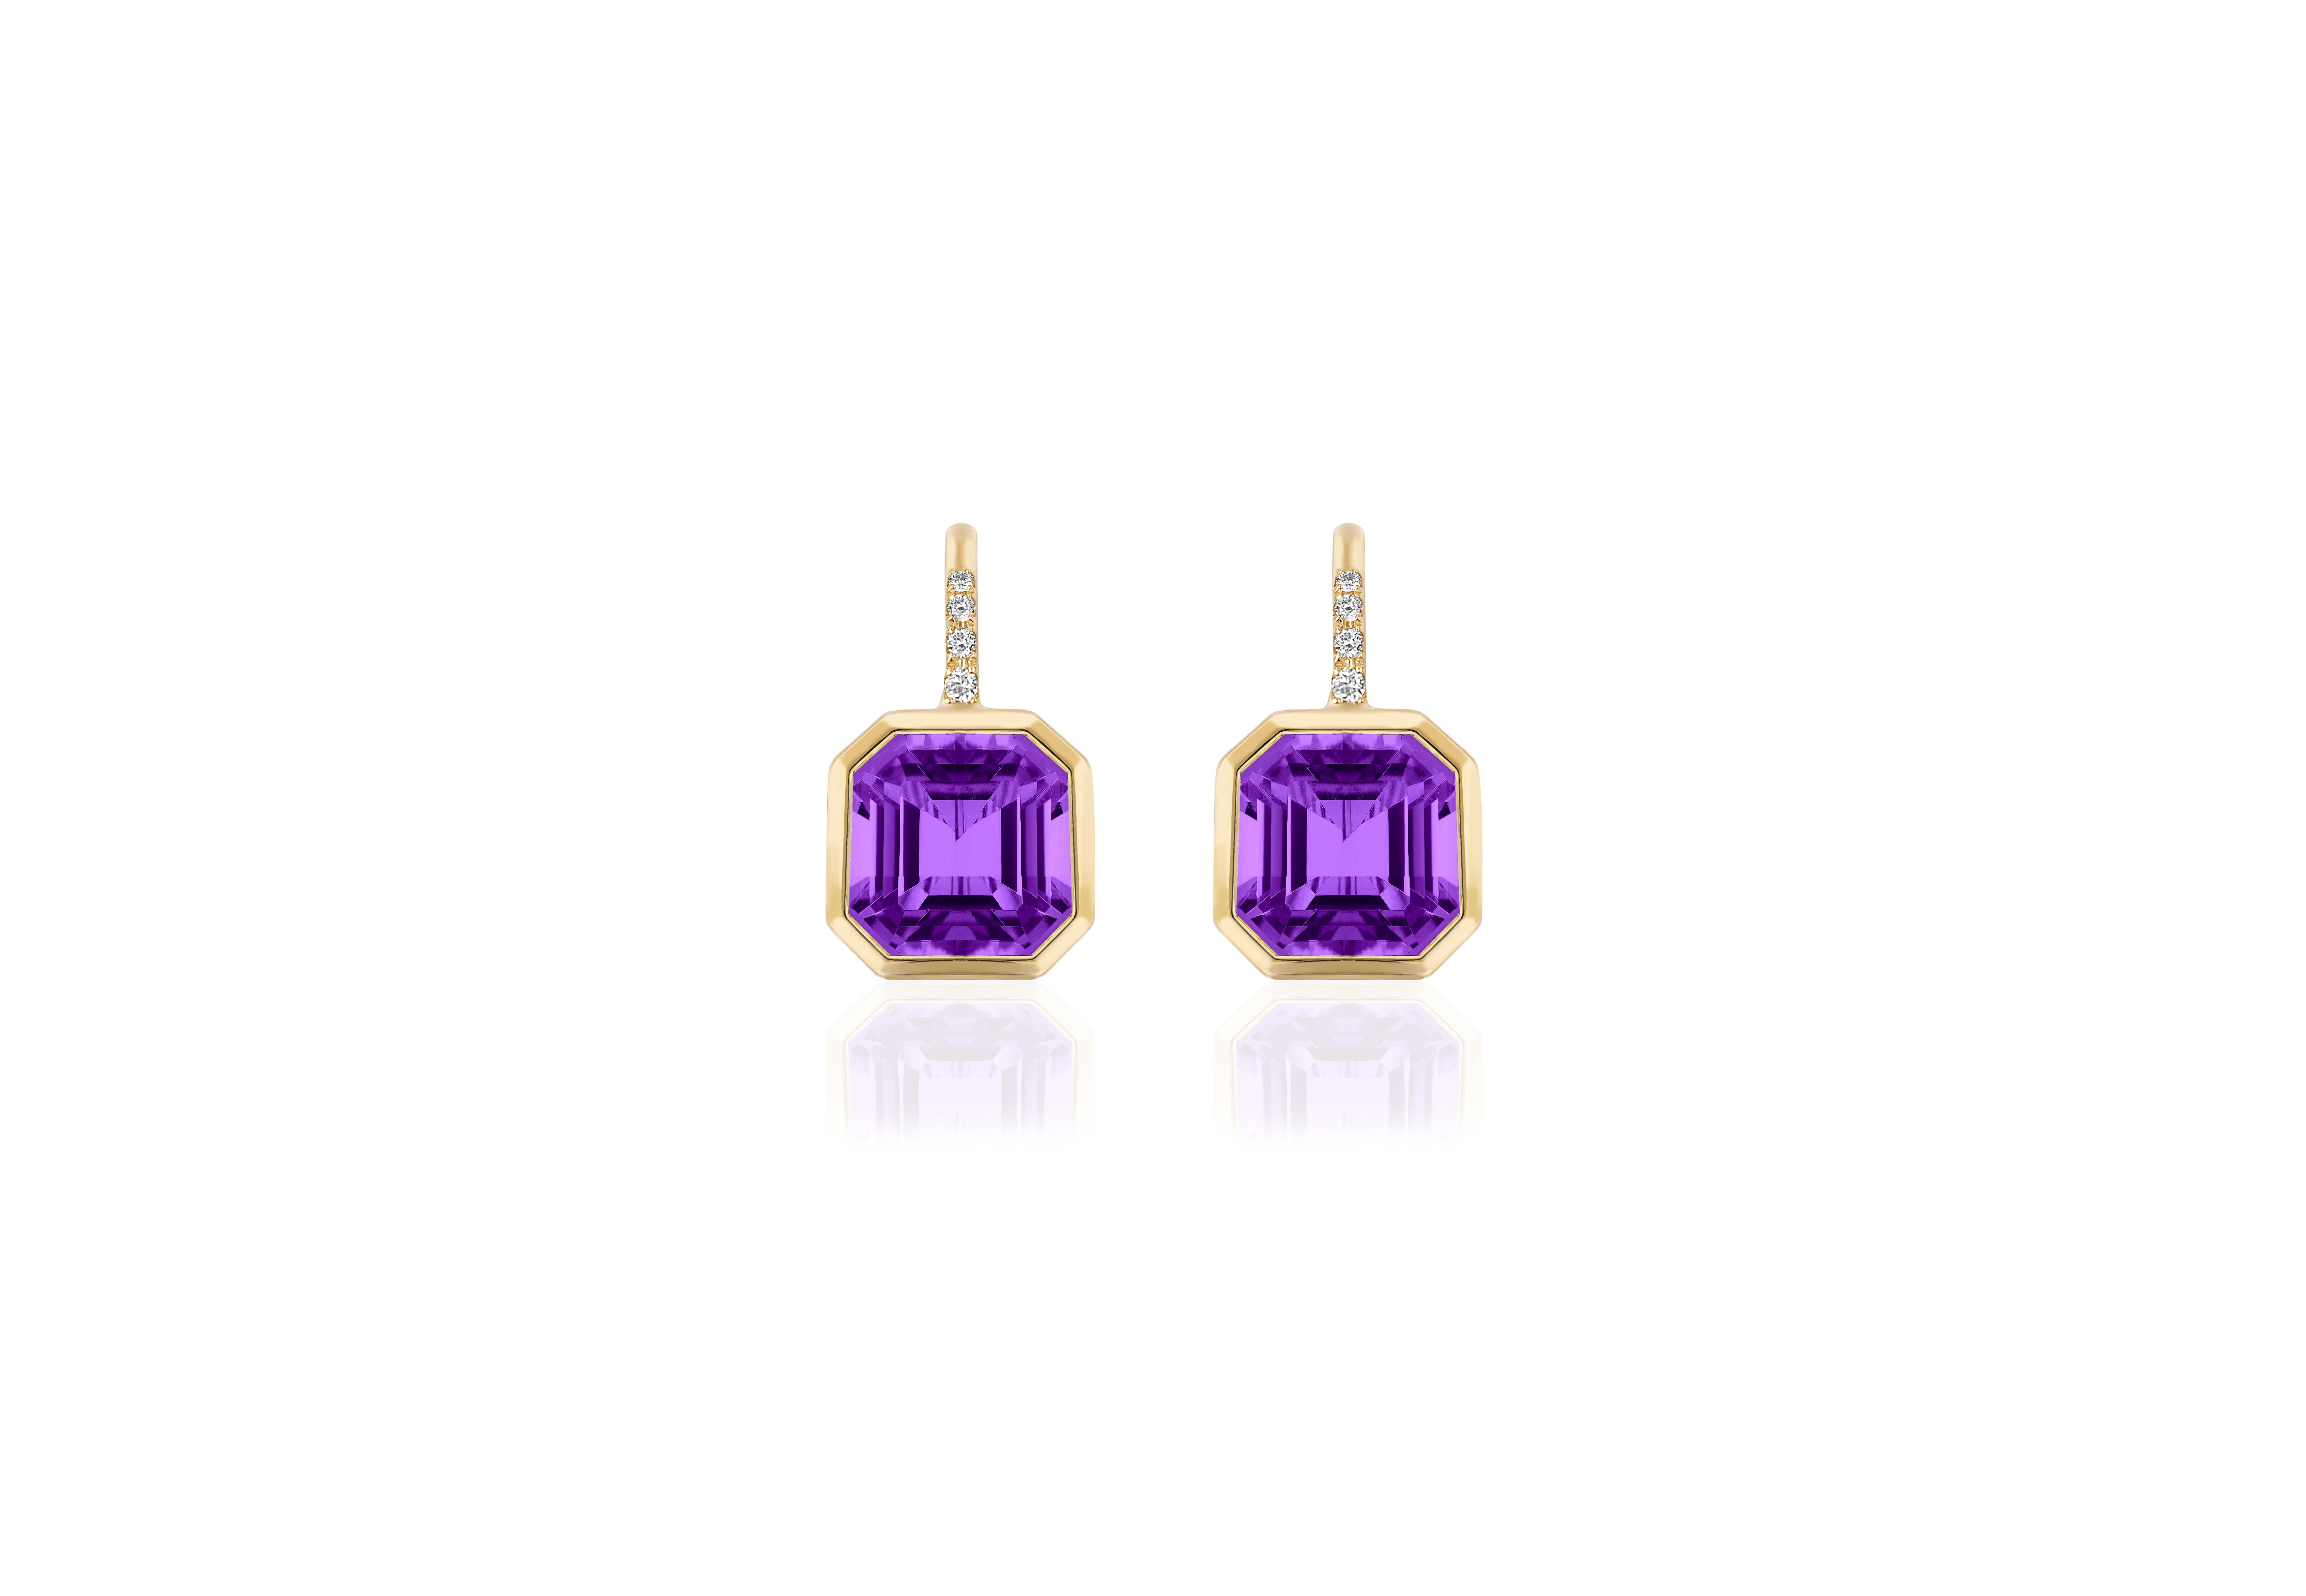 These beautiful earrings in a 9 x 9 mm Asscher cut, which is a blend of the princess and emerald cuts with X-shaped facets from its corners to its center culet, are made in Amethyst gemstone. They are set on wire with 4 Diamonds in 18K Gold. These